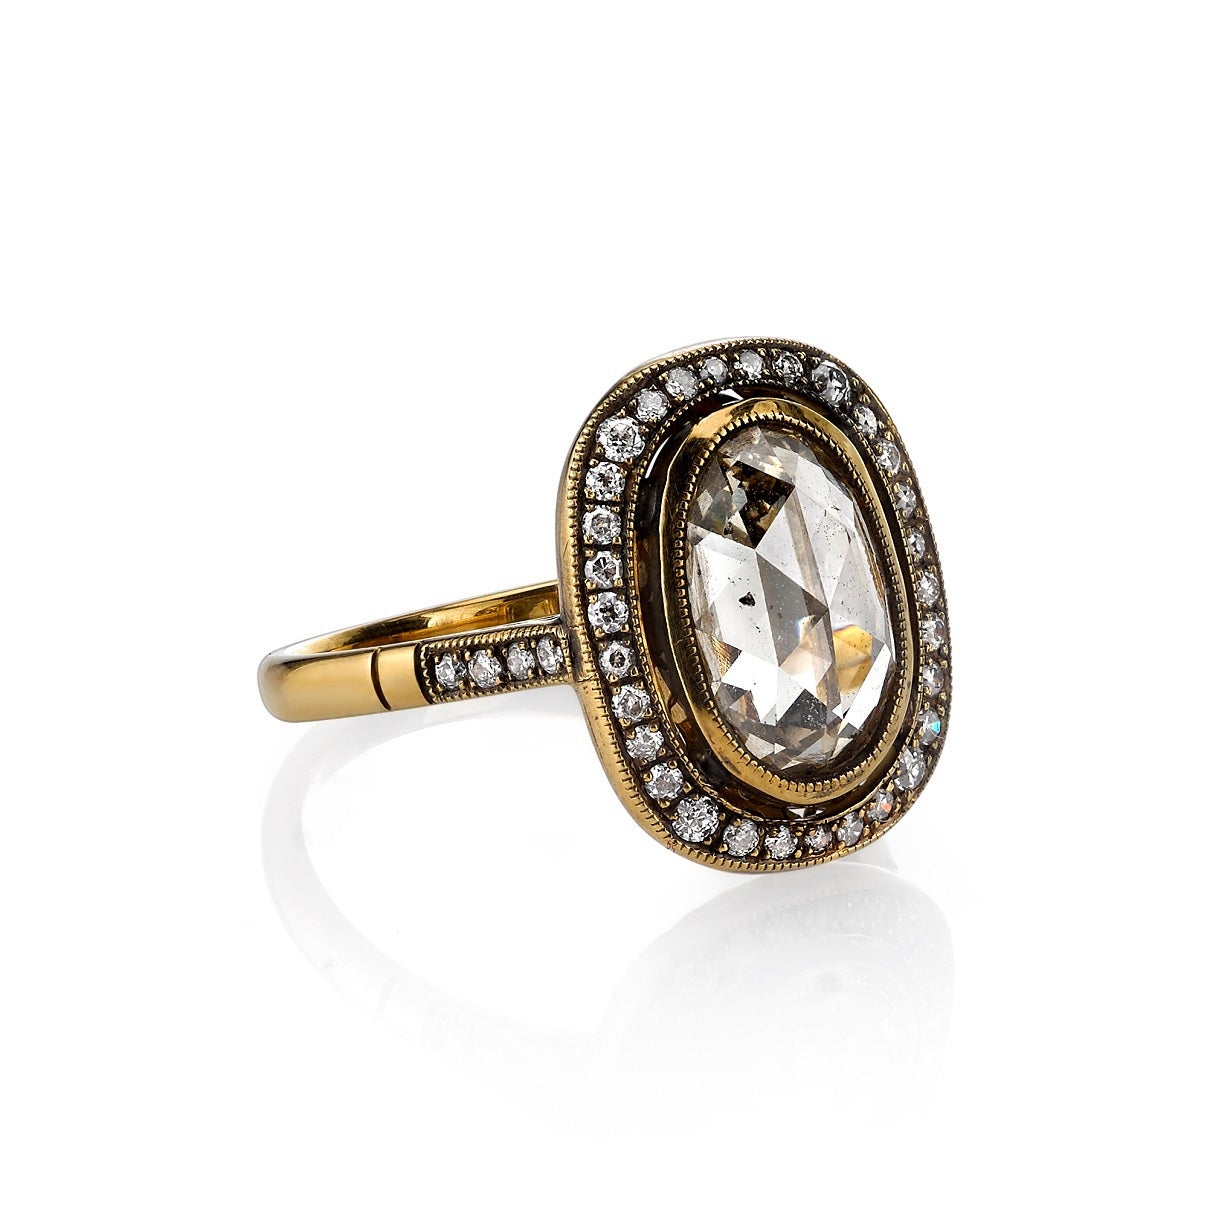 2.12ct Brown/SI oval Rose cut diamond set in a hand crafted 18K oxidized yellow gold mounting. A halo design featuring a bezel set diamond, low profile, and intricate gallery.